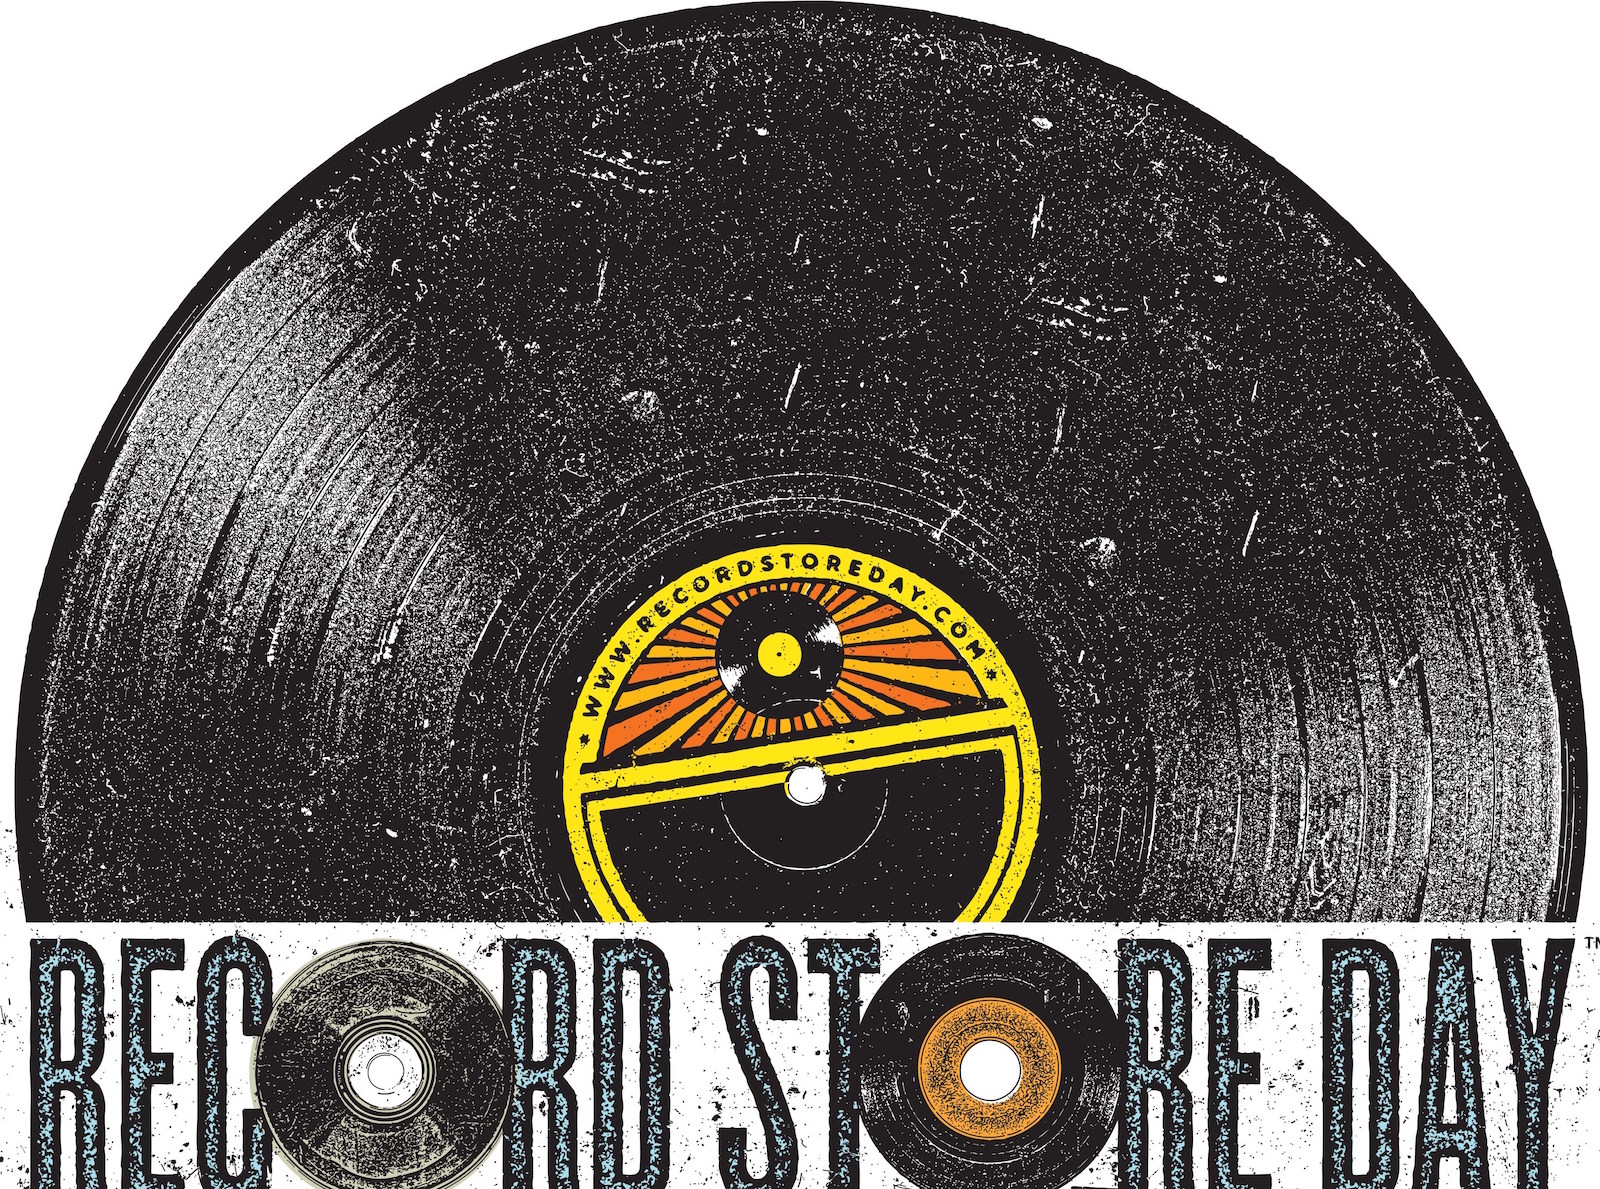 Record Store Day is Every April... Next One is Saturday, April 21st, 2018